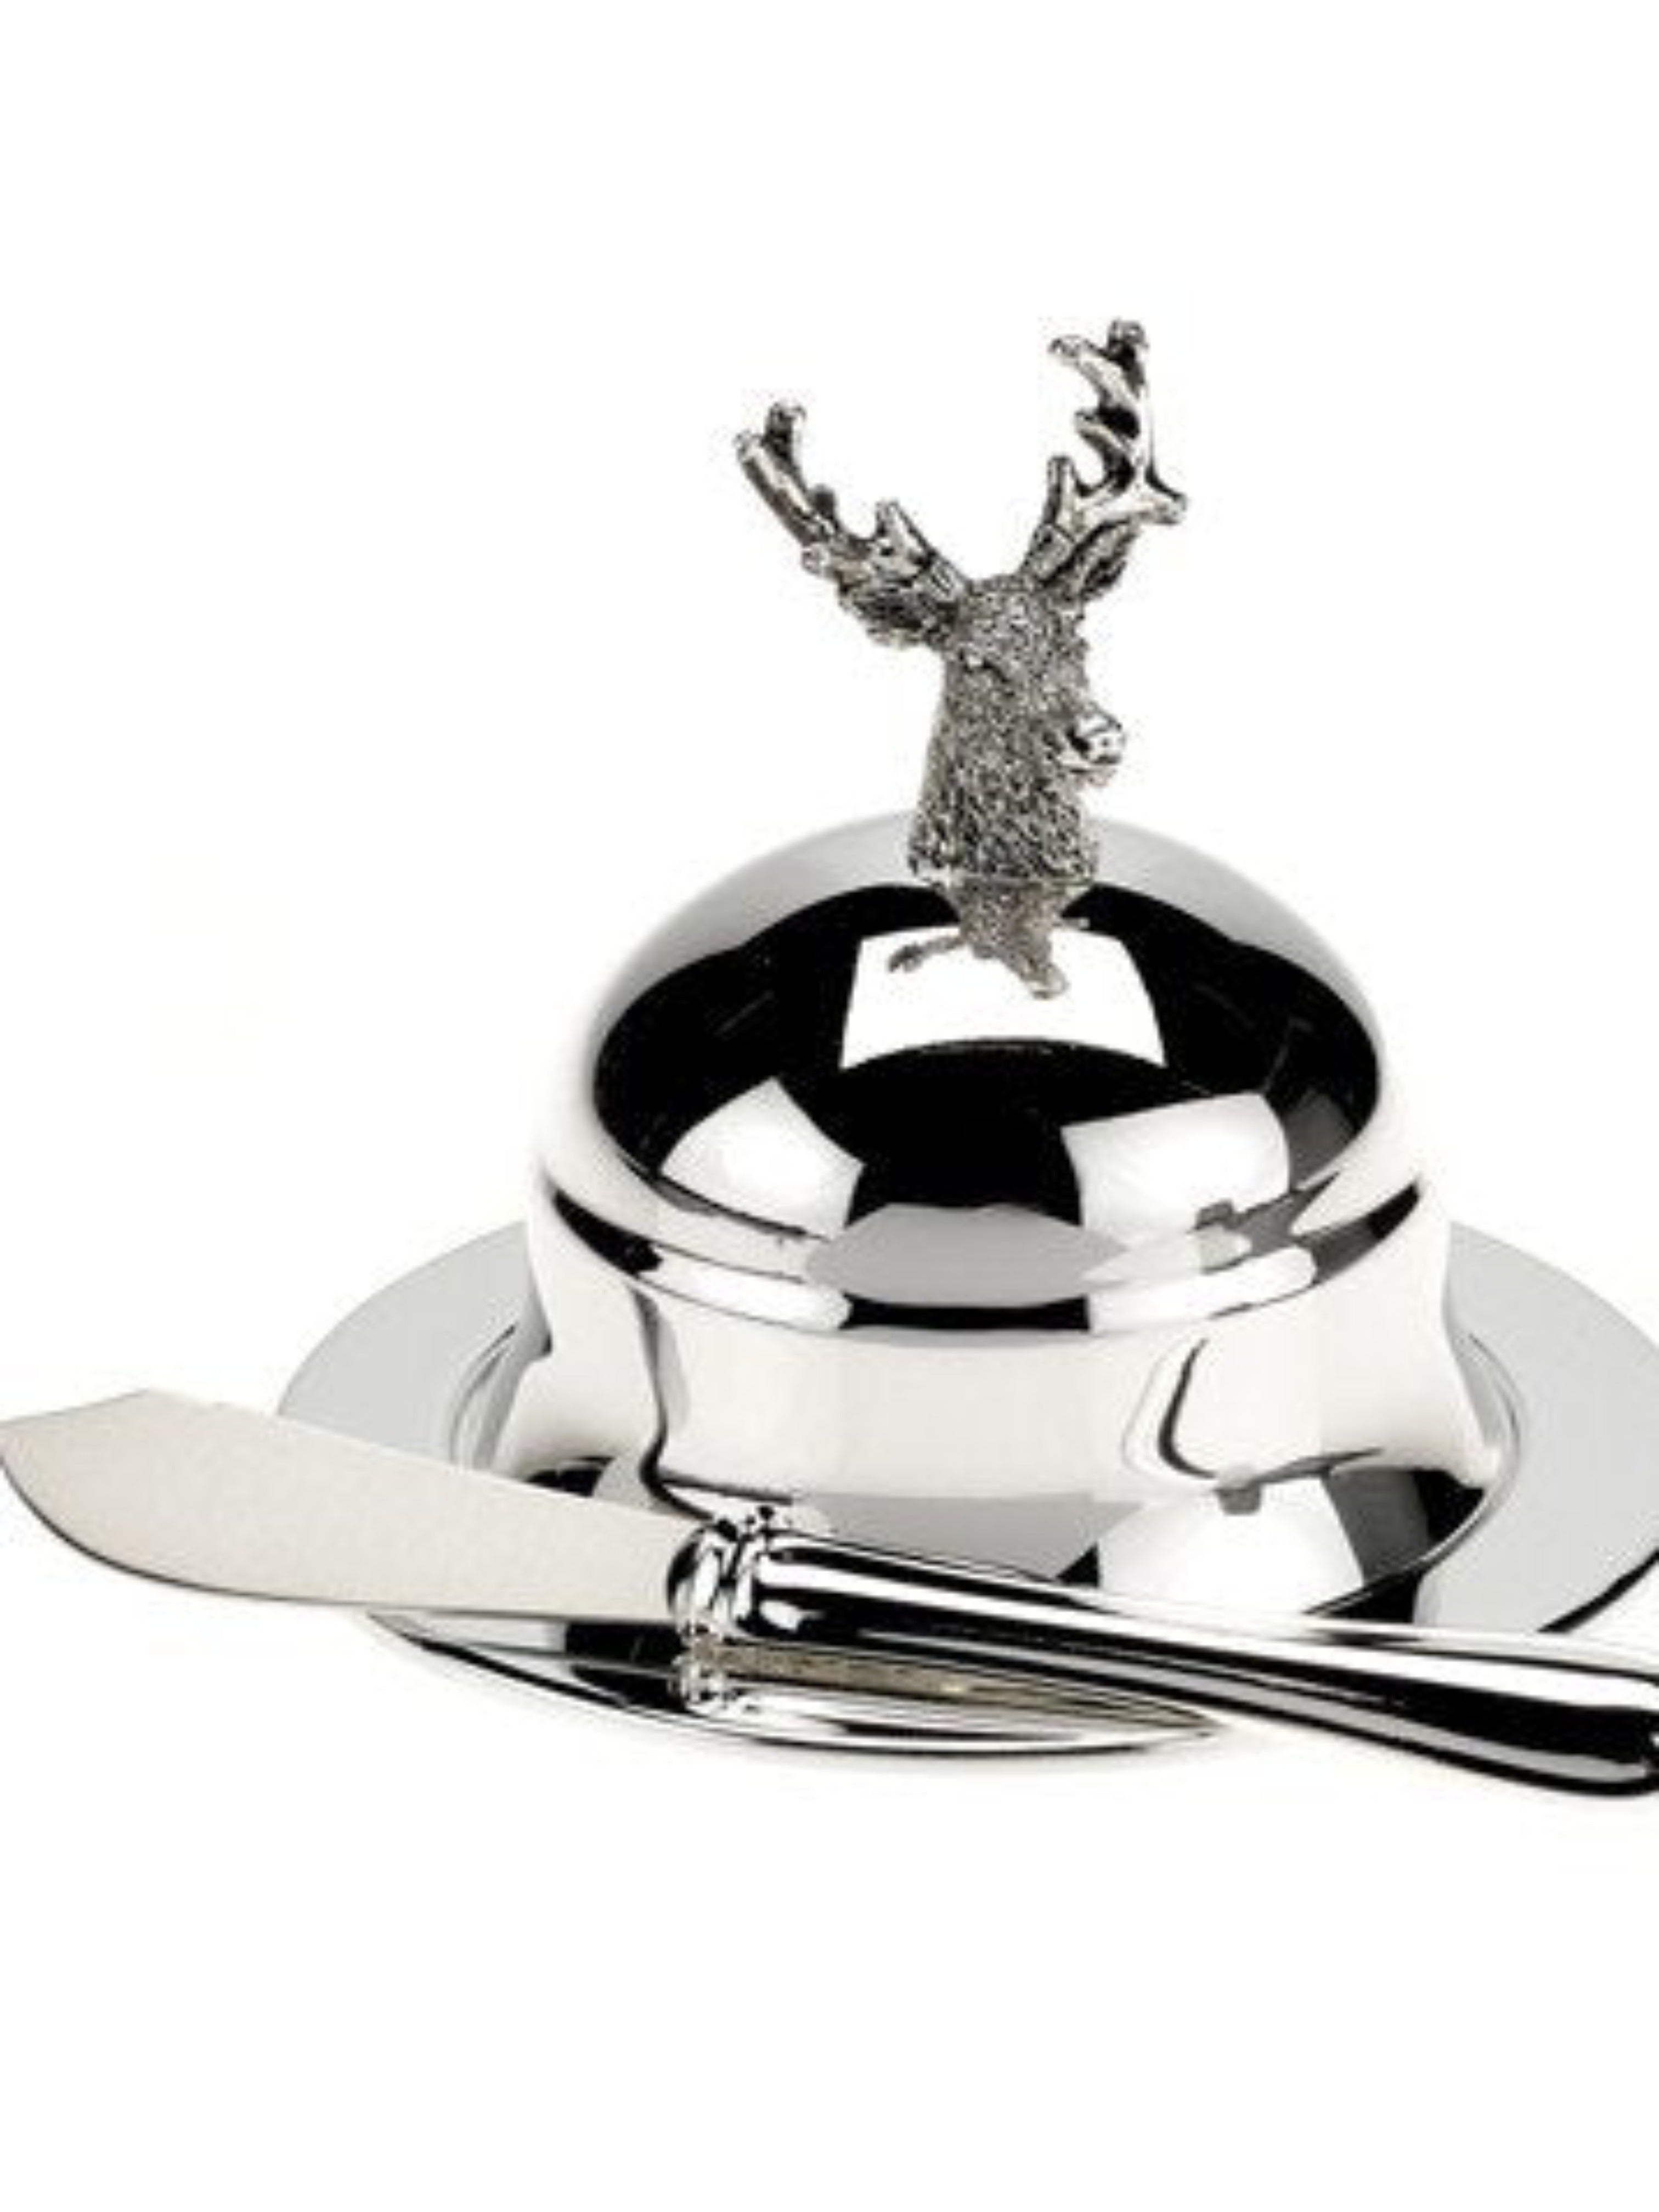 Stag Round Butter Dish and Spreader